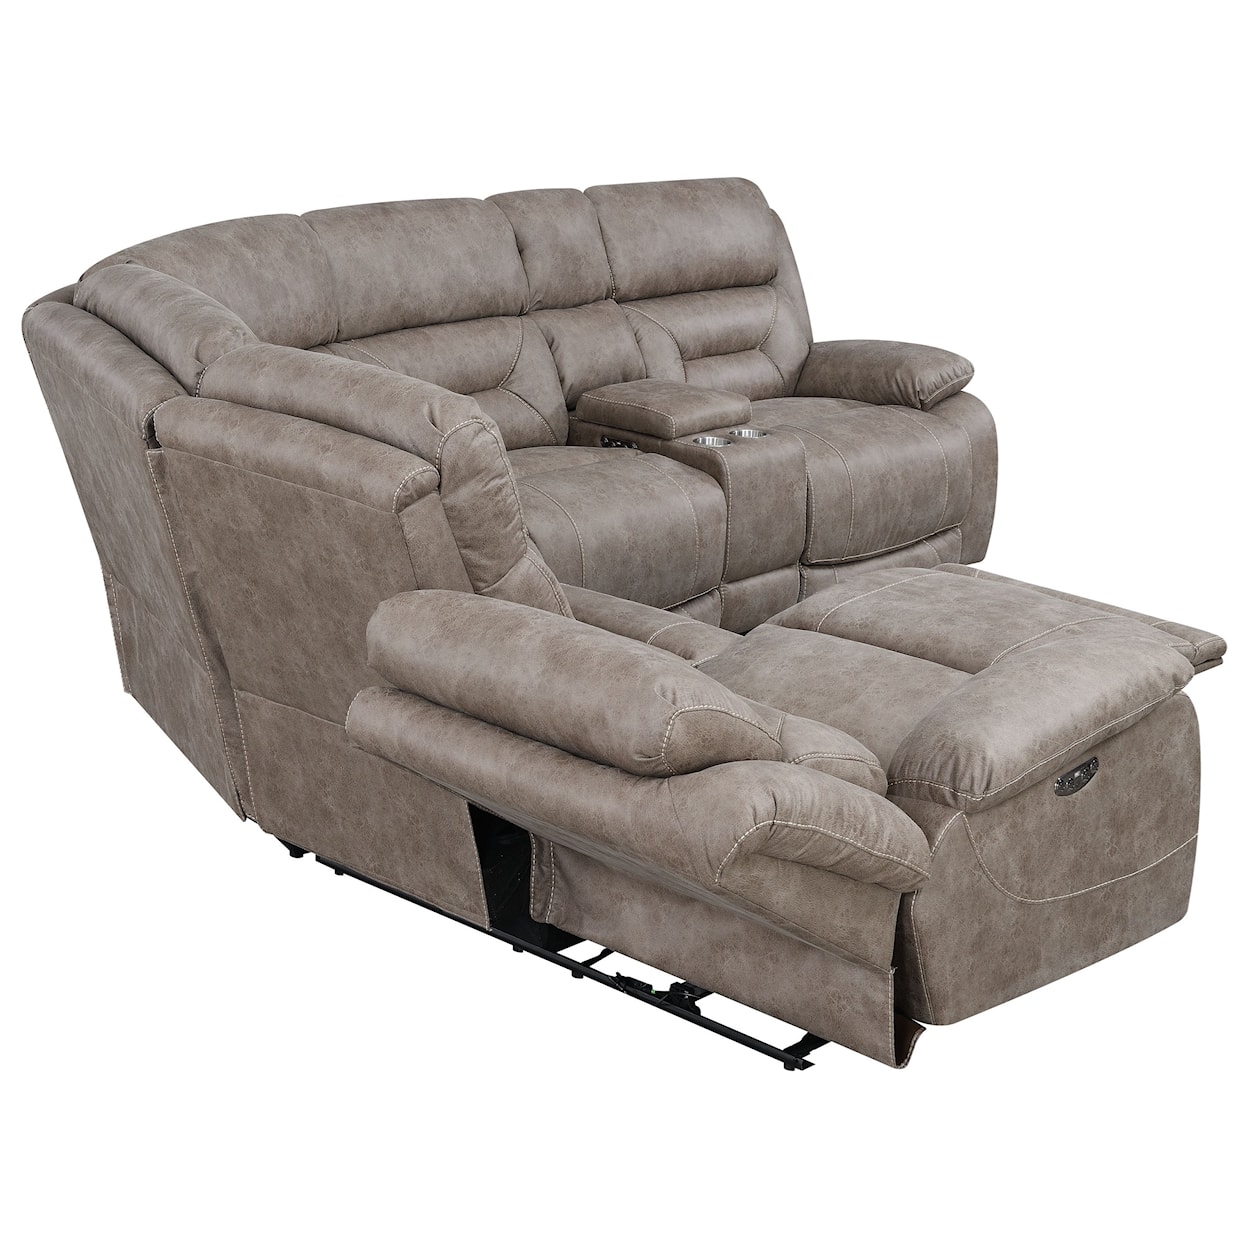 Steve Silver Aria 3 Piece Reclining Sectional Sofa